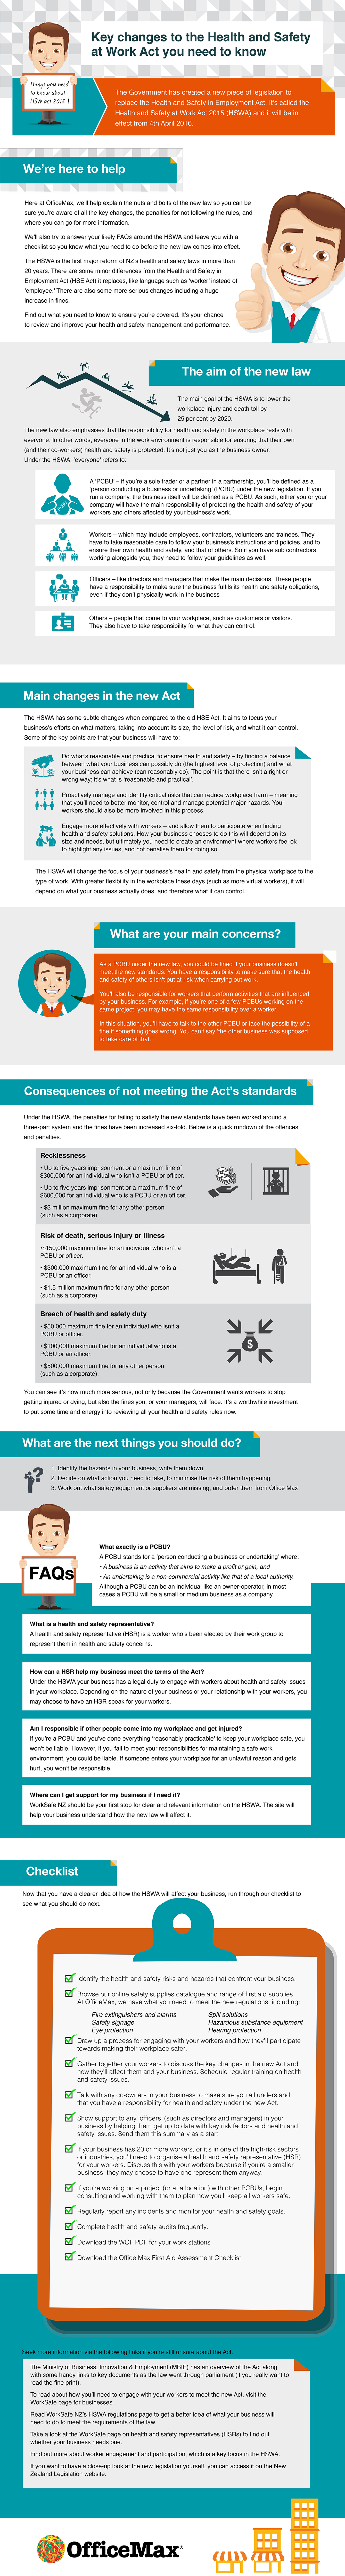 OfficeMax safety Health safetyact workact Government Employment infograohics